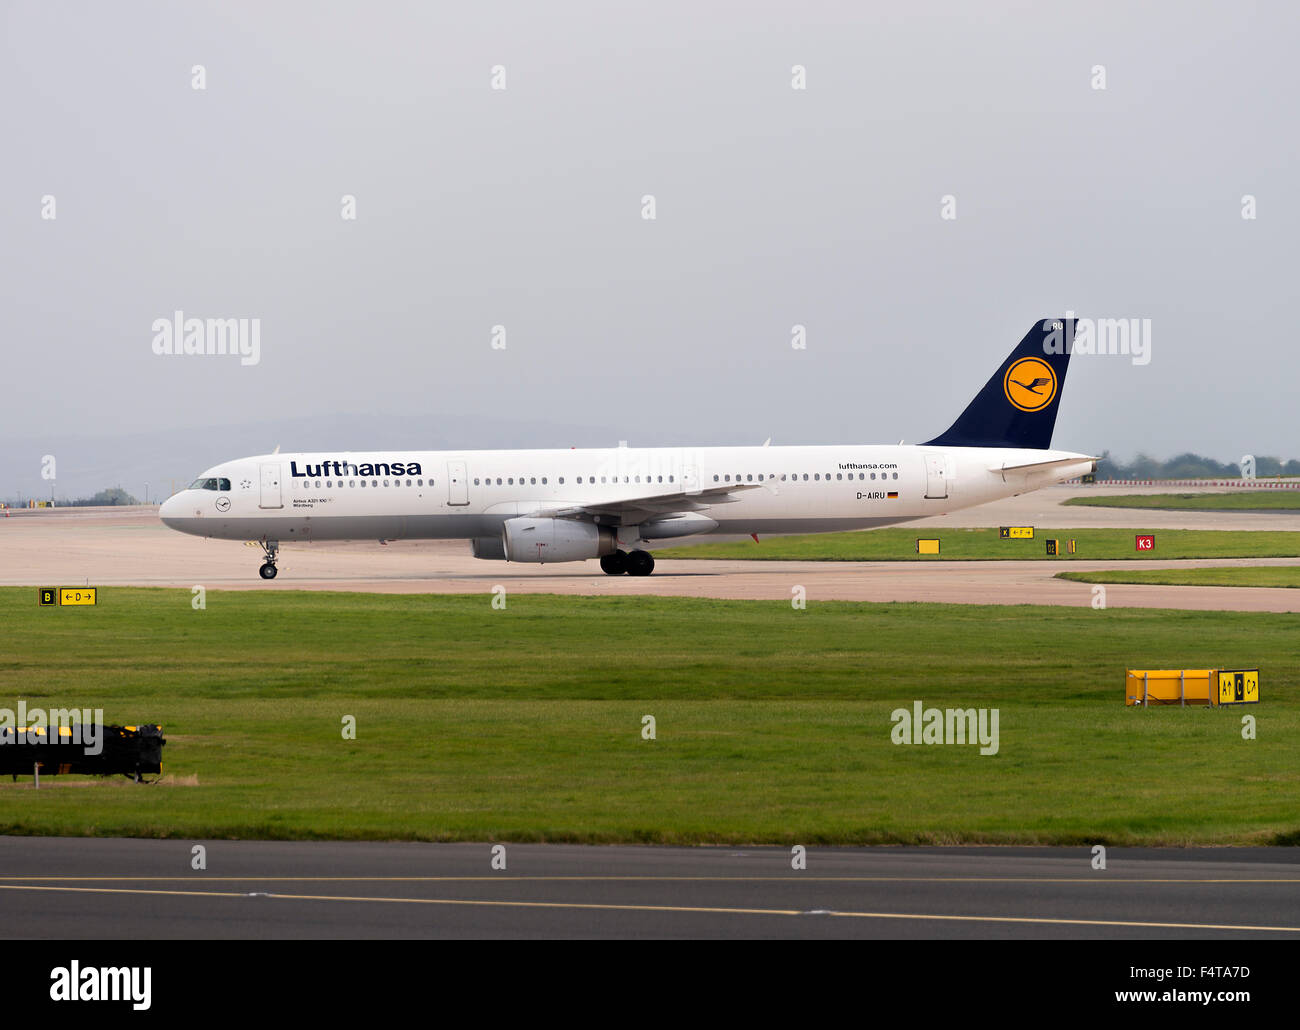 Lufthansa Airline Airbus A321-131 Airliner D-AIRU Taxiing on Arrival at Manchester International Airport England UK Stock Photo